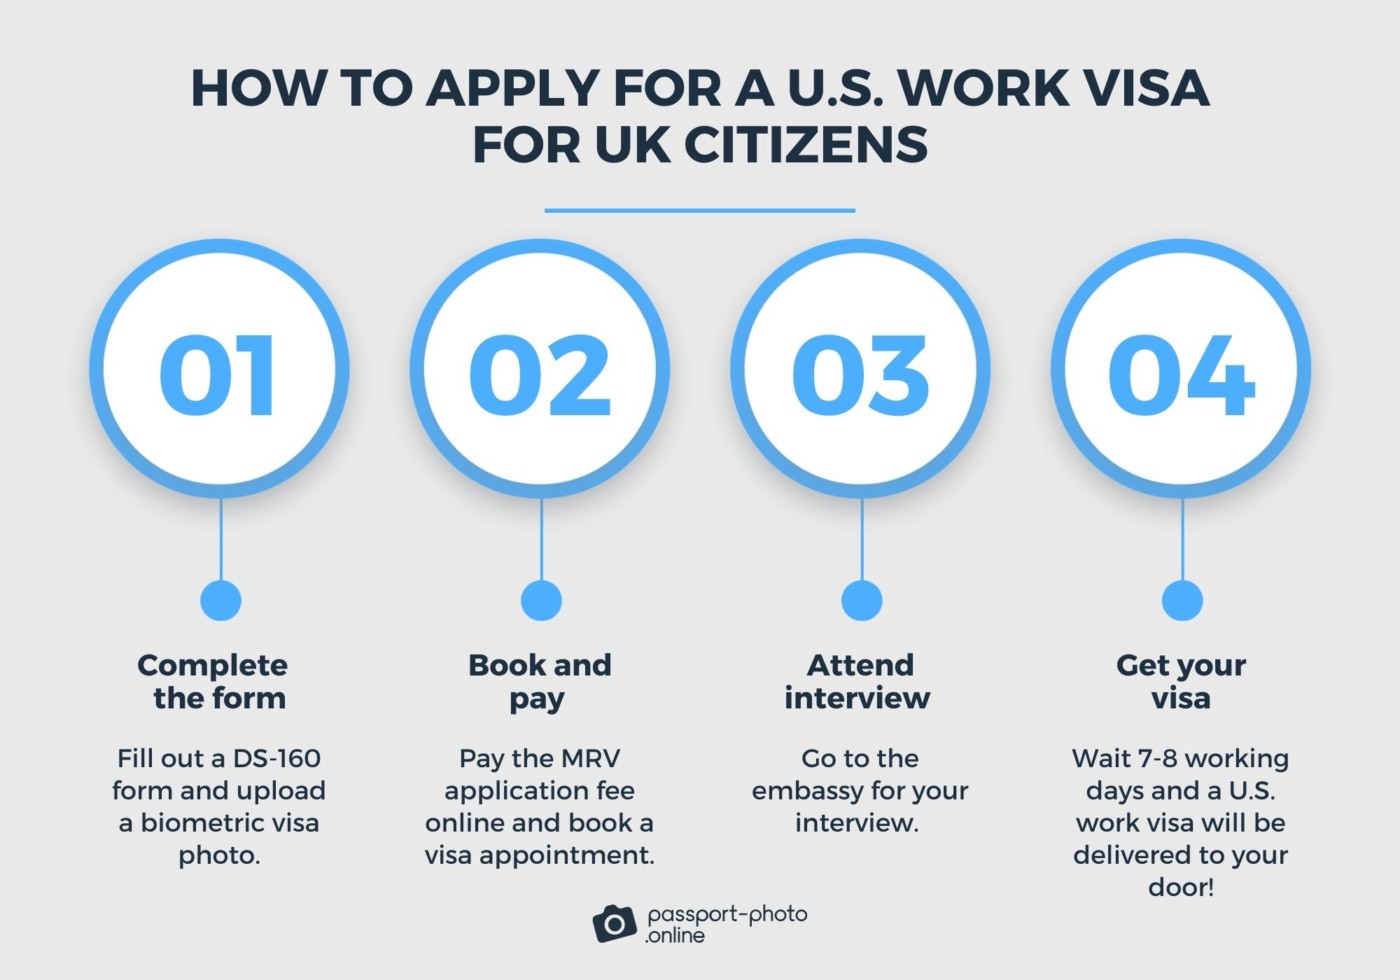 U.S. Work Visa for UK citizens application step-by-step guide.